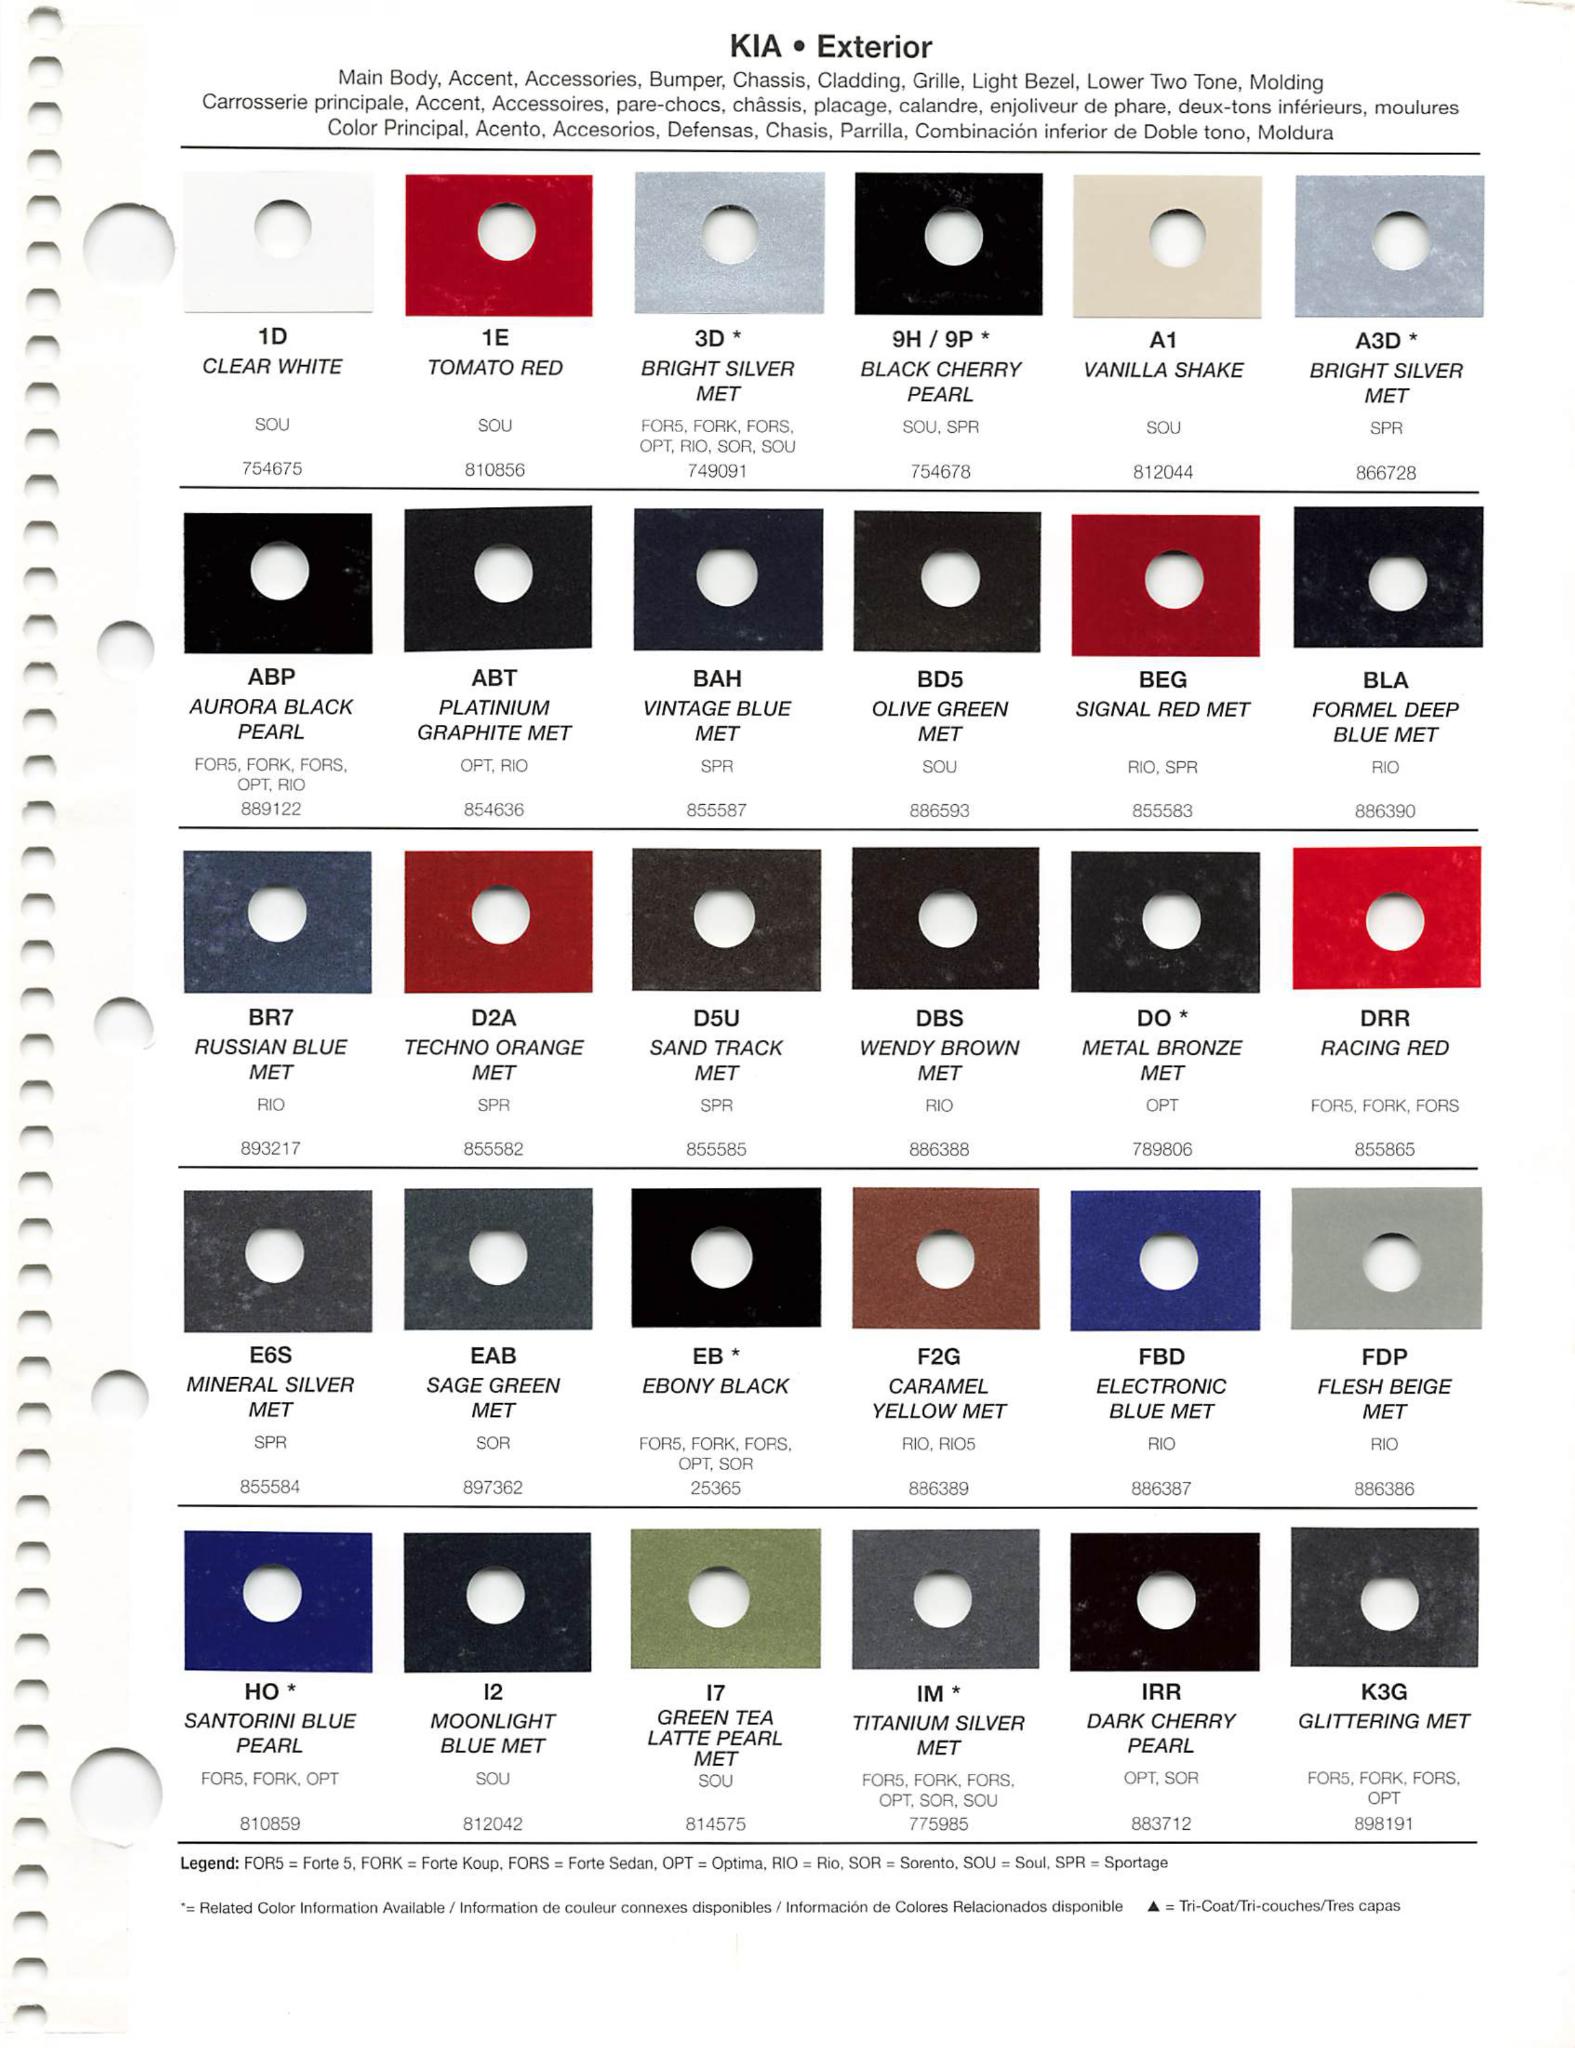 Paint Codes and Color Names for 2013 Kia's